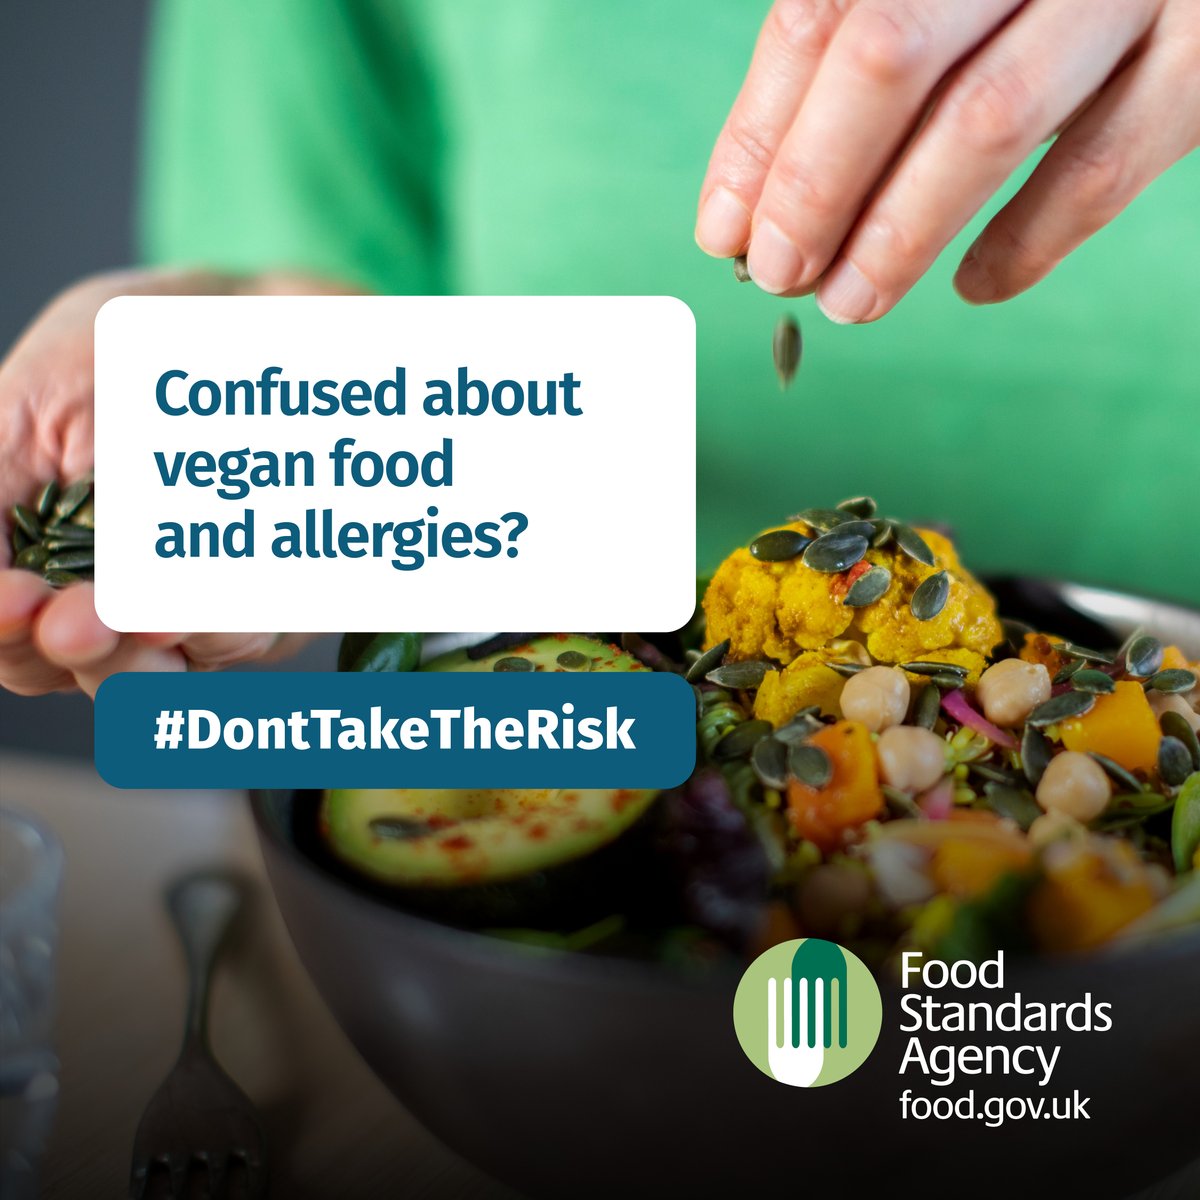 Vegan or plant-based food may not be safe for people with allergies to milk, eggs, fish or shellfish. It could be produced or prepared alongside these allergens meaning there’s a chance of cross-contamination. Don’t take the risk, check the label. bit.ly/3uWybB9